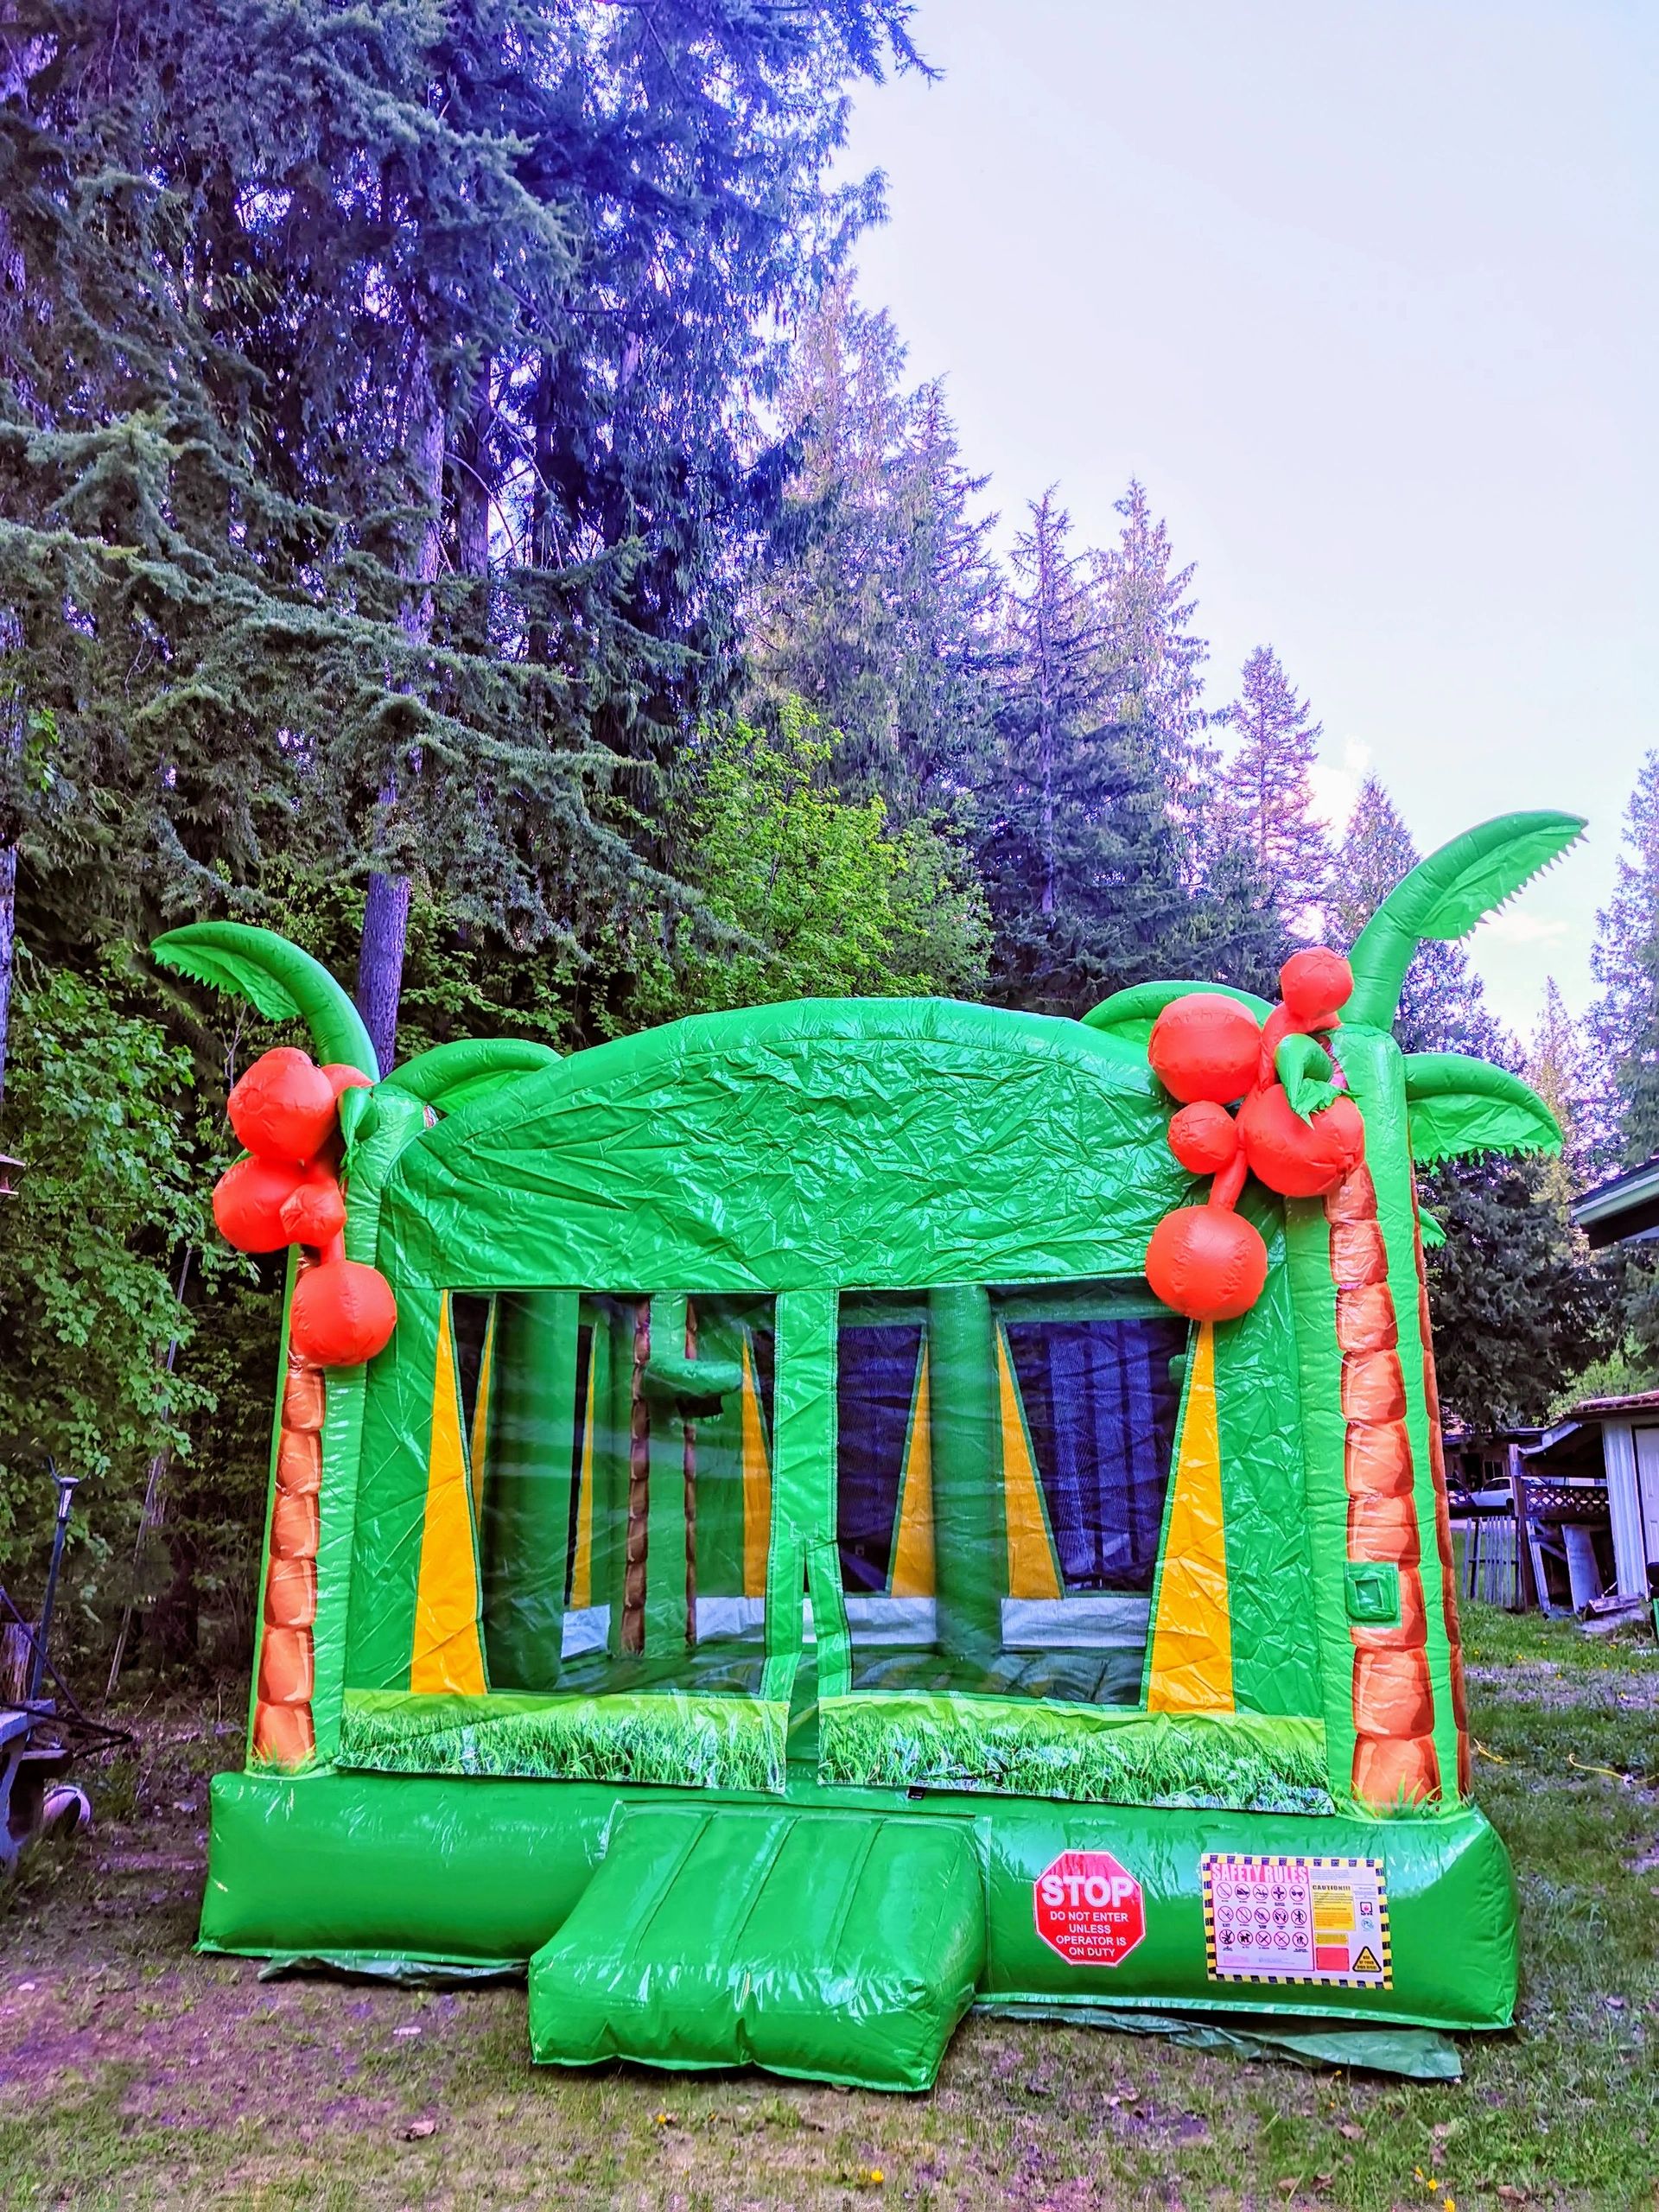 Tropical Bouncy House with palm trees